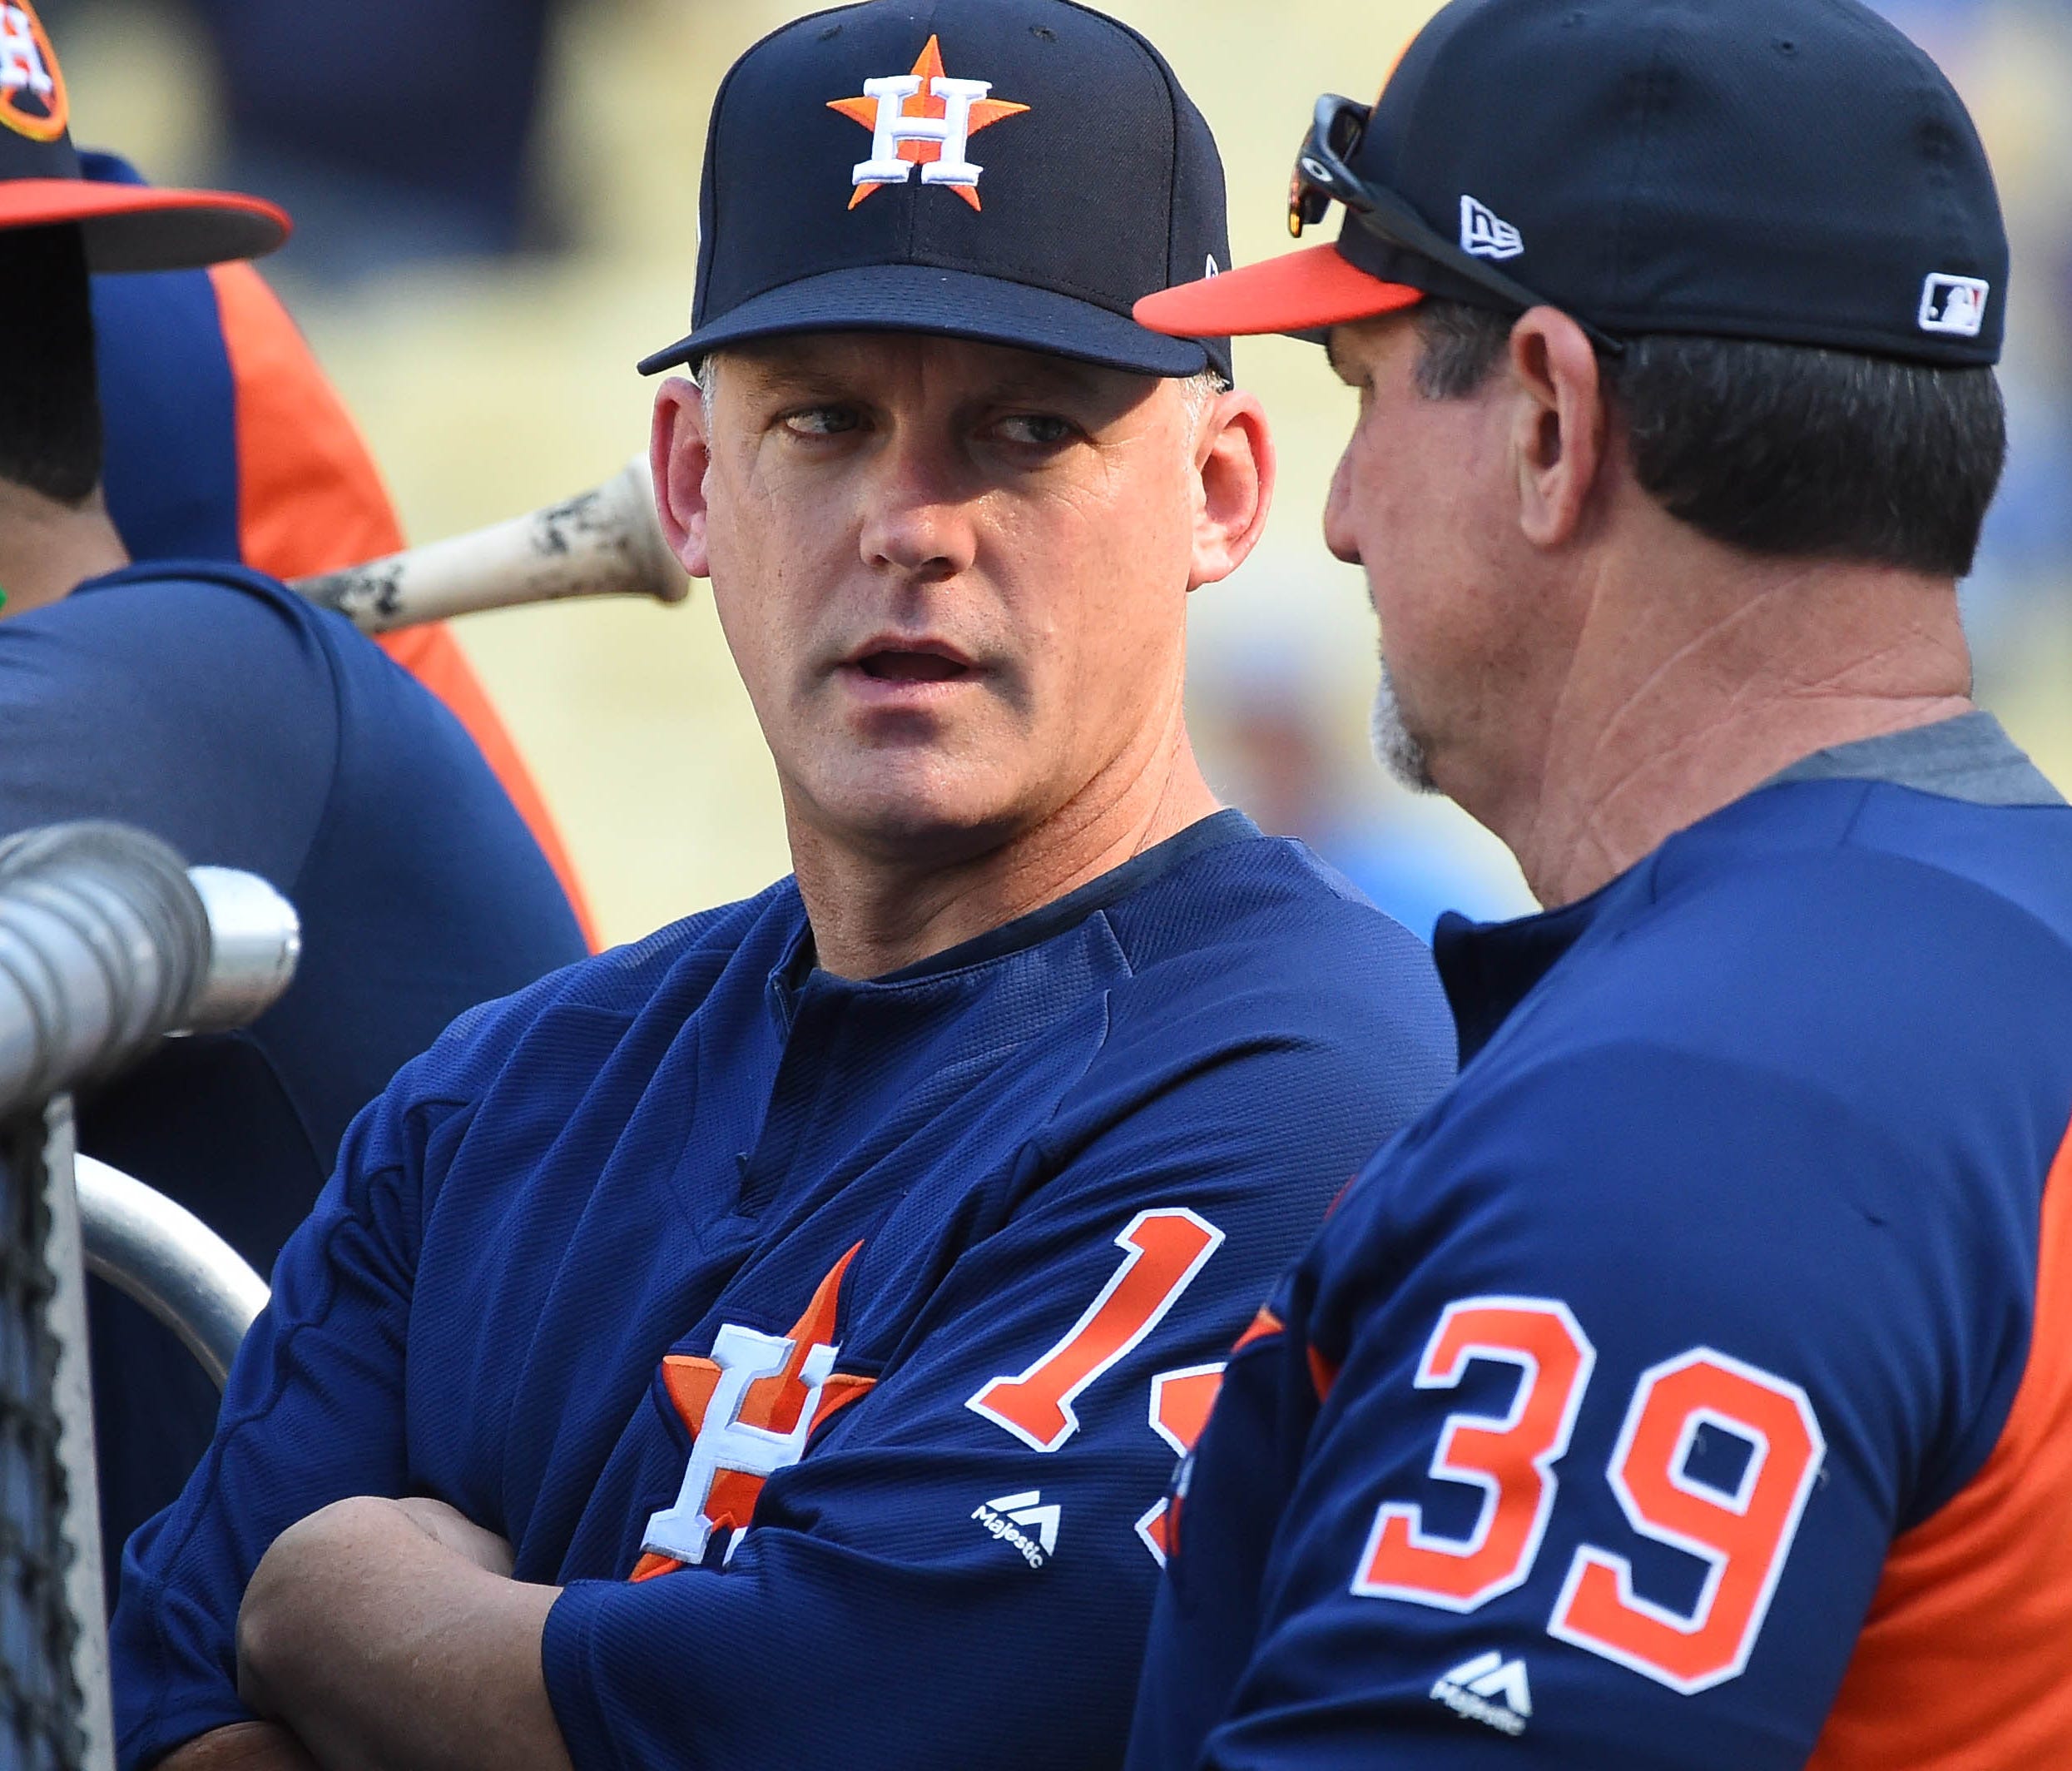 Manager A.J. Hinch has led the Astros to the World Series.